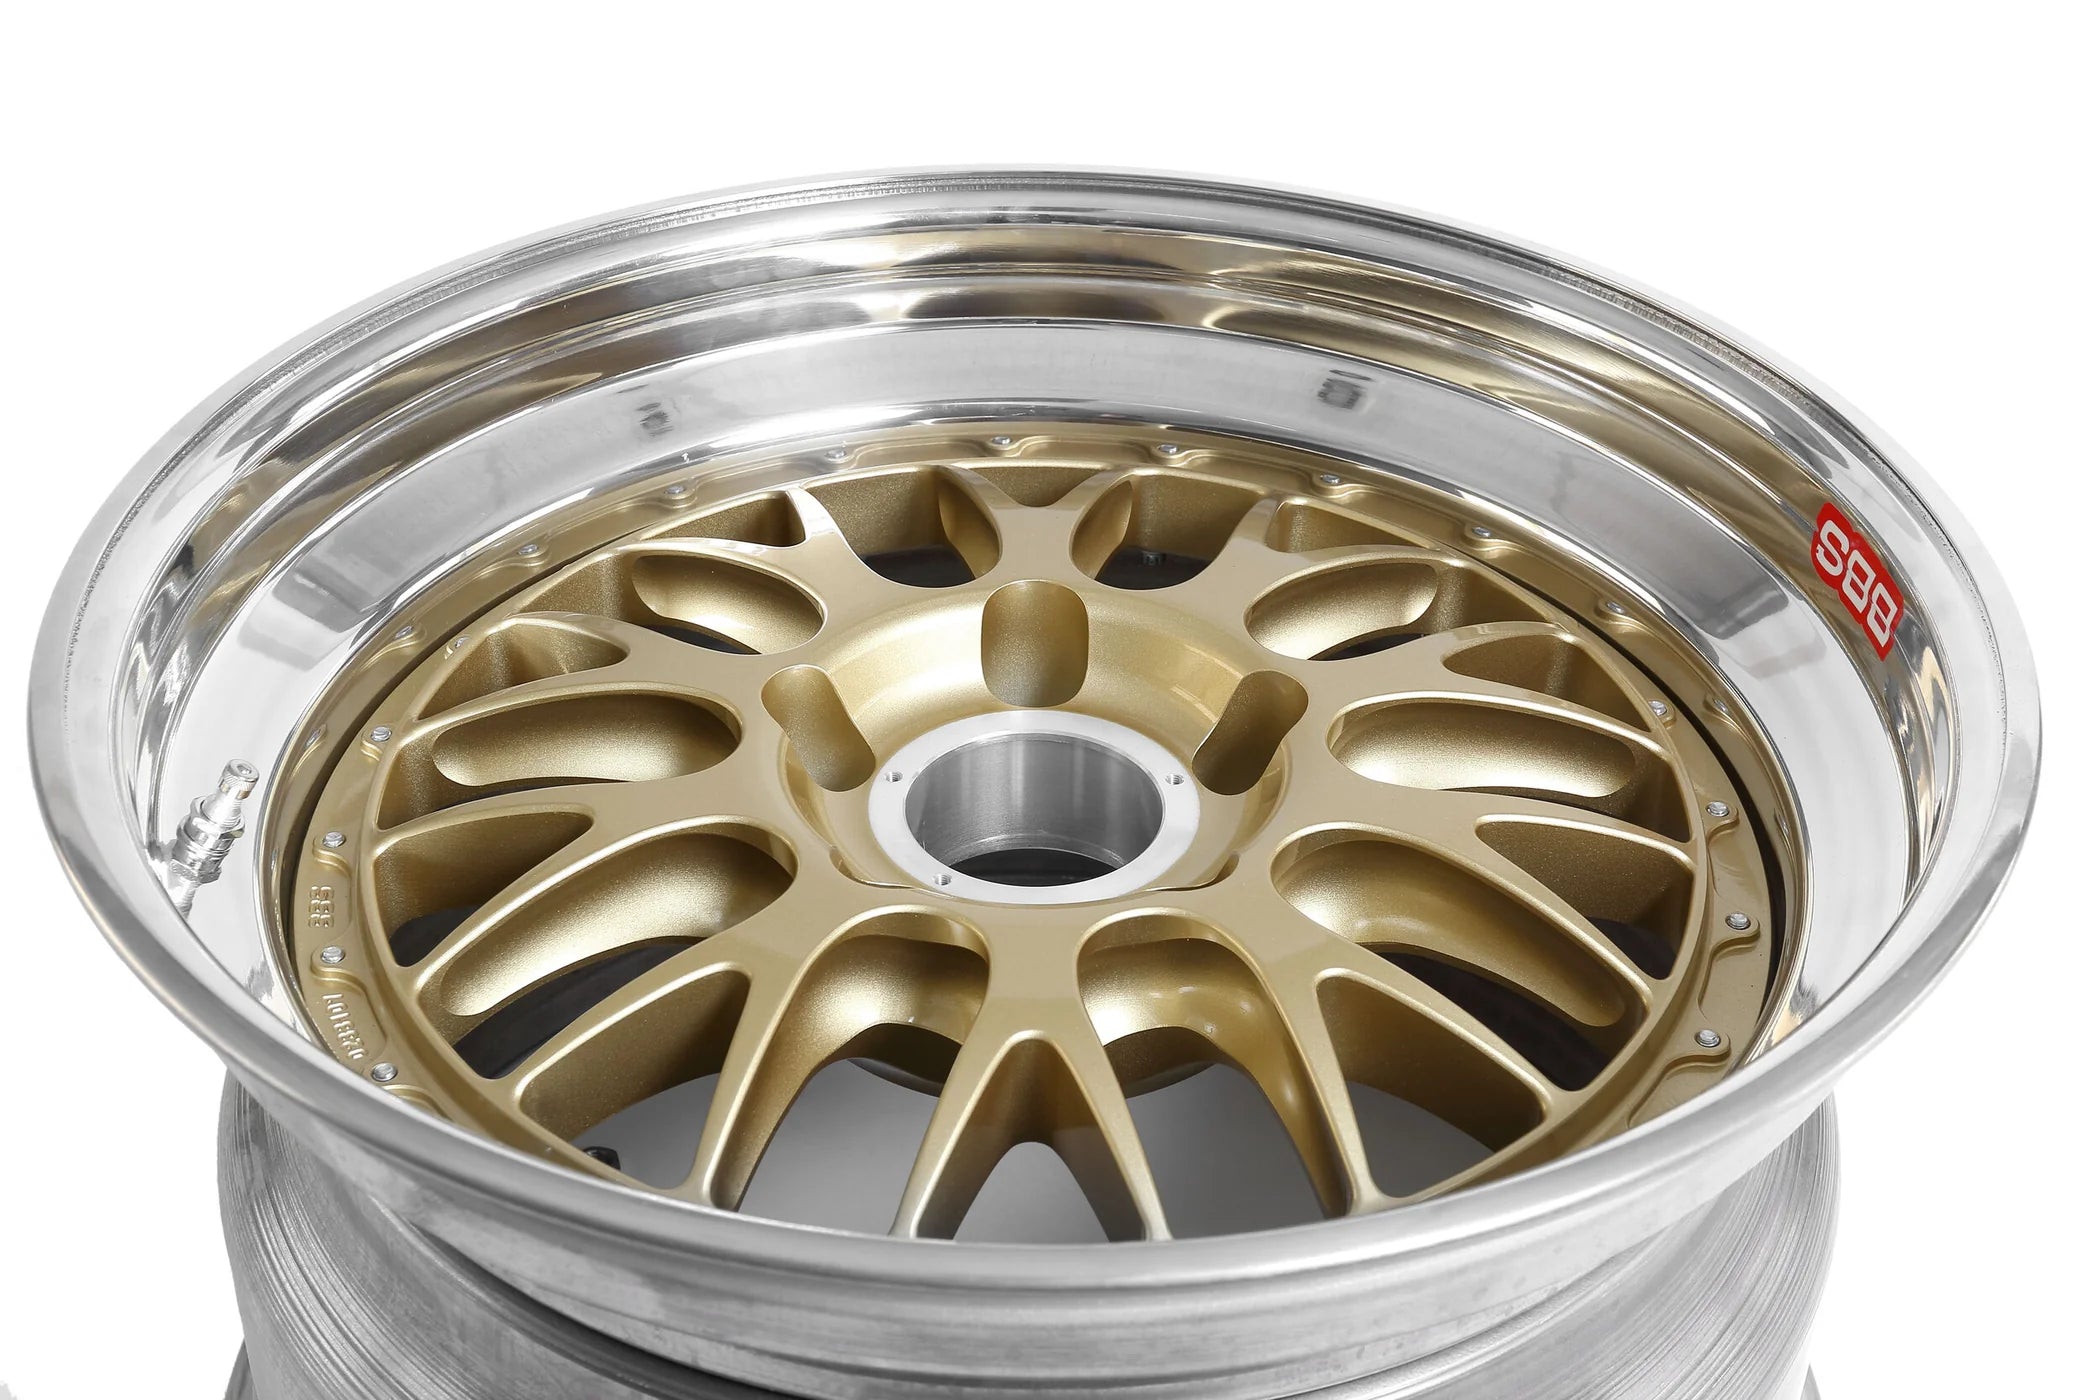 Our favorite aftermarket wheels